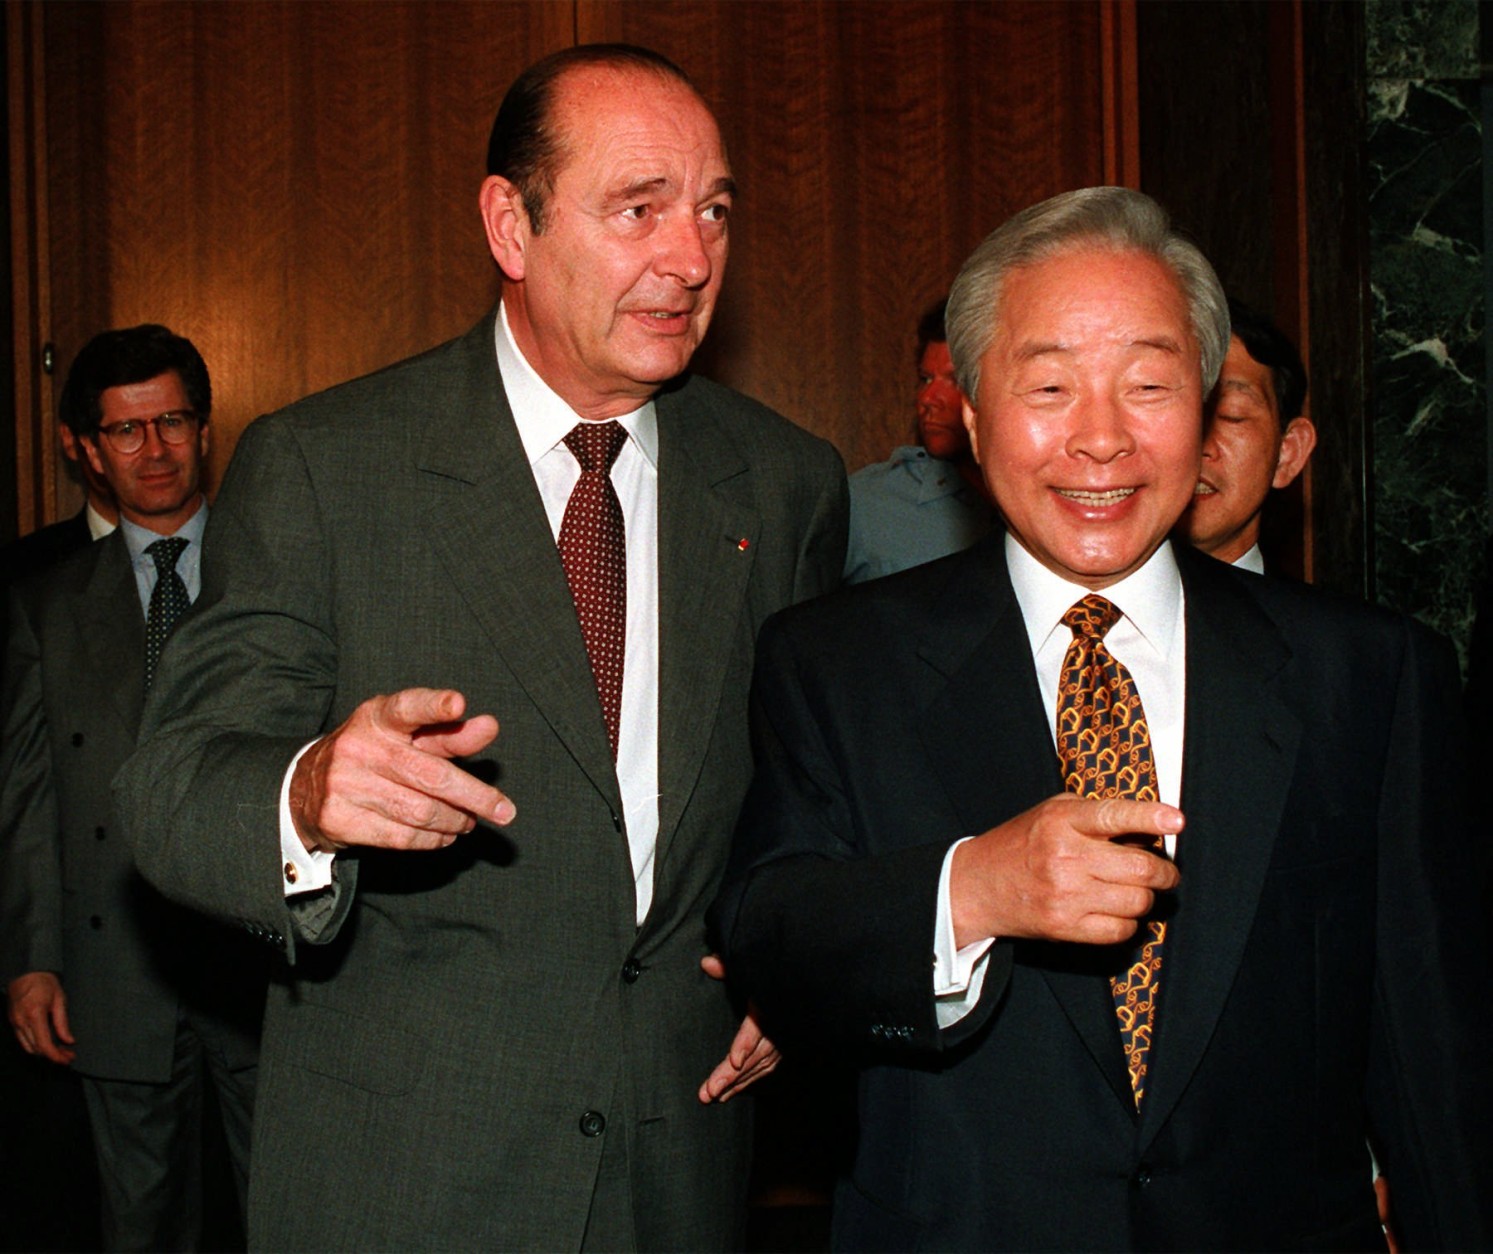 President of France Jacques Chirac, left, and South Korean President Kim Young-sam gesture during a bilateral meeting at the United Nations, Monday, June 23, 1997. Leaders and envoys from more than 170 nations gathered at the U.N. for a five-day conference to review progress since the 1992 Earth Summit. (AP Photo/Kathy Willens)